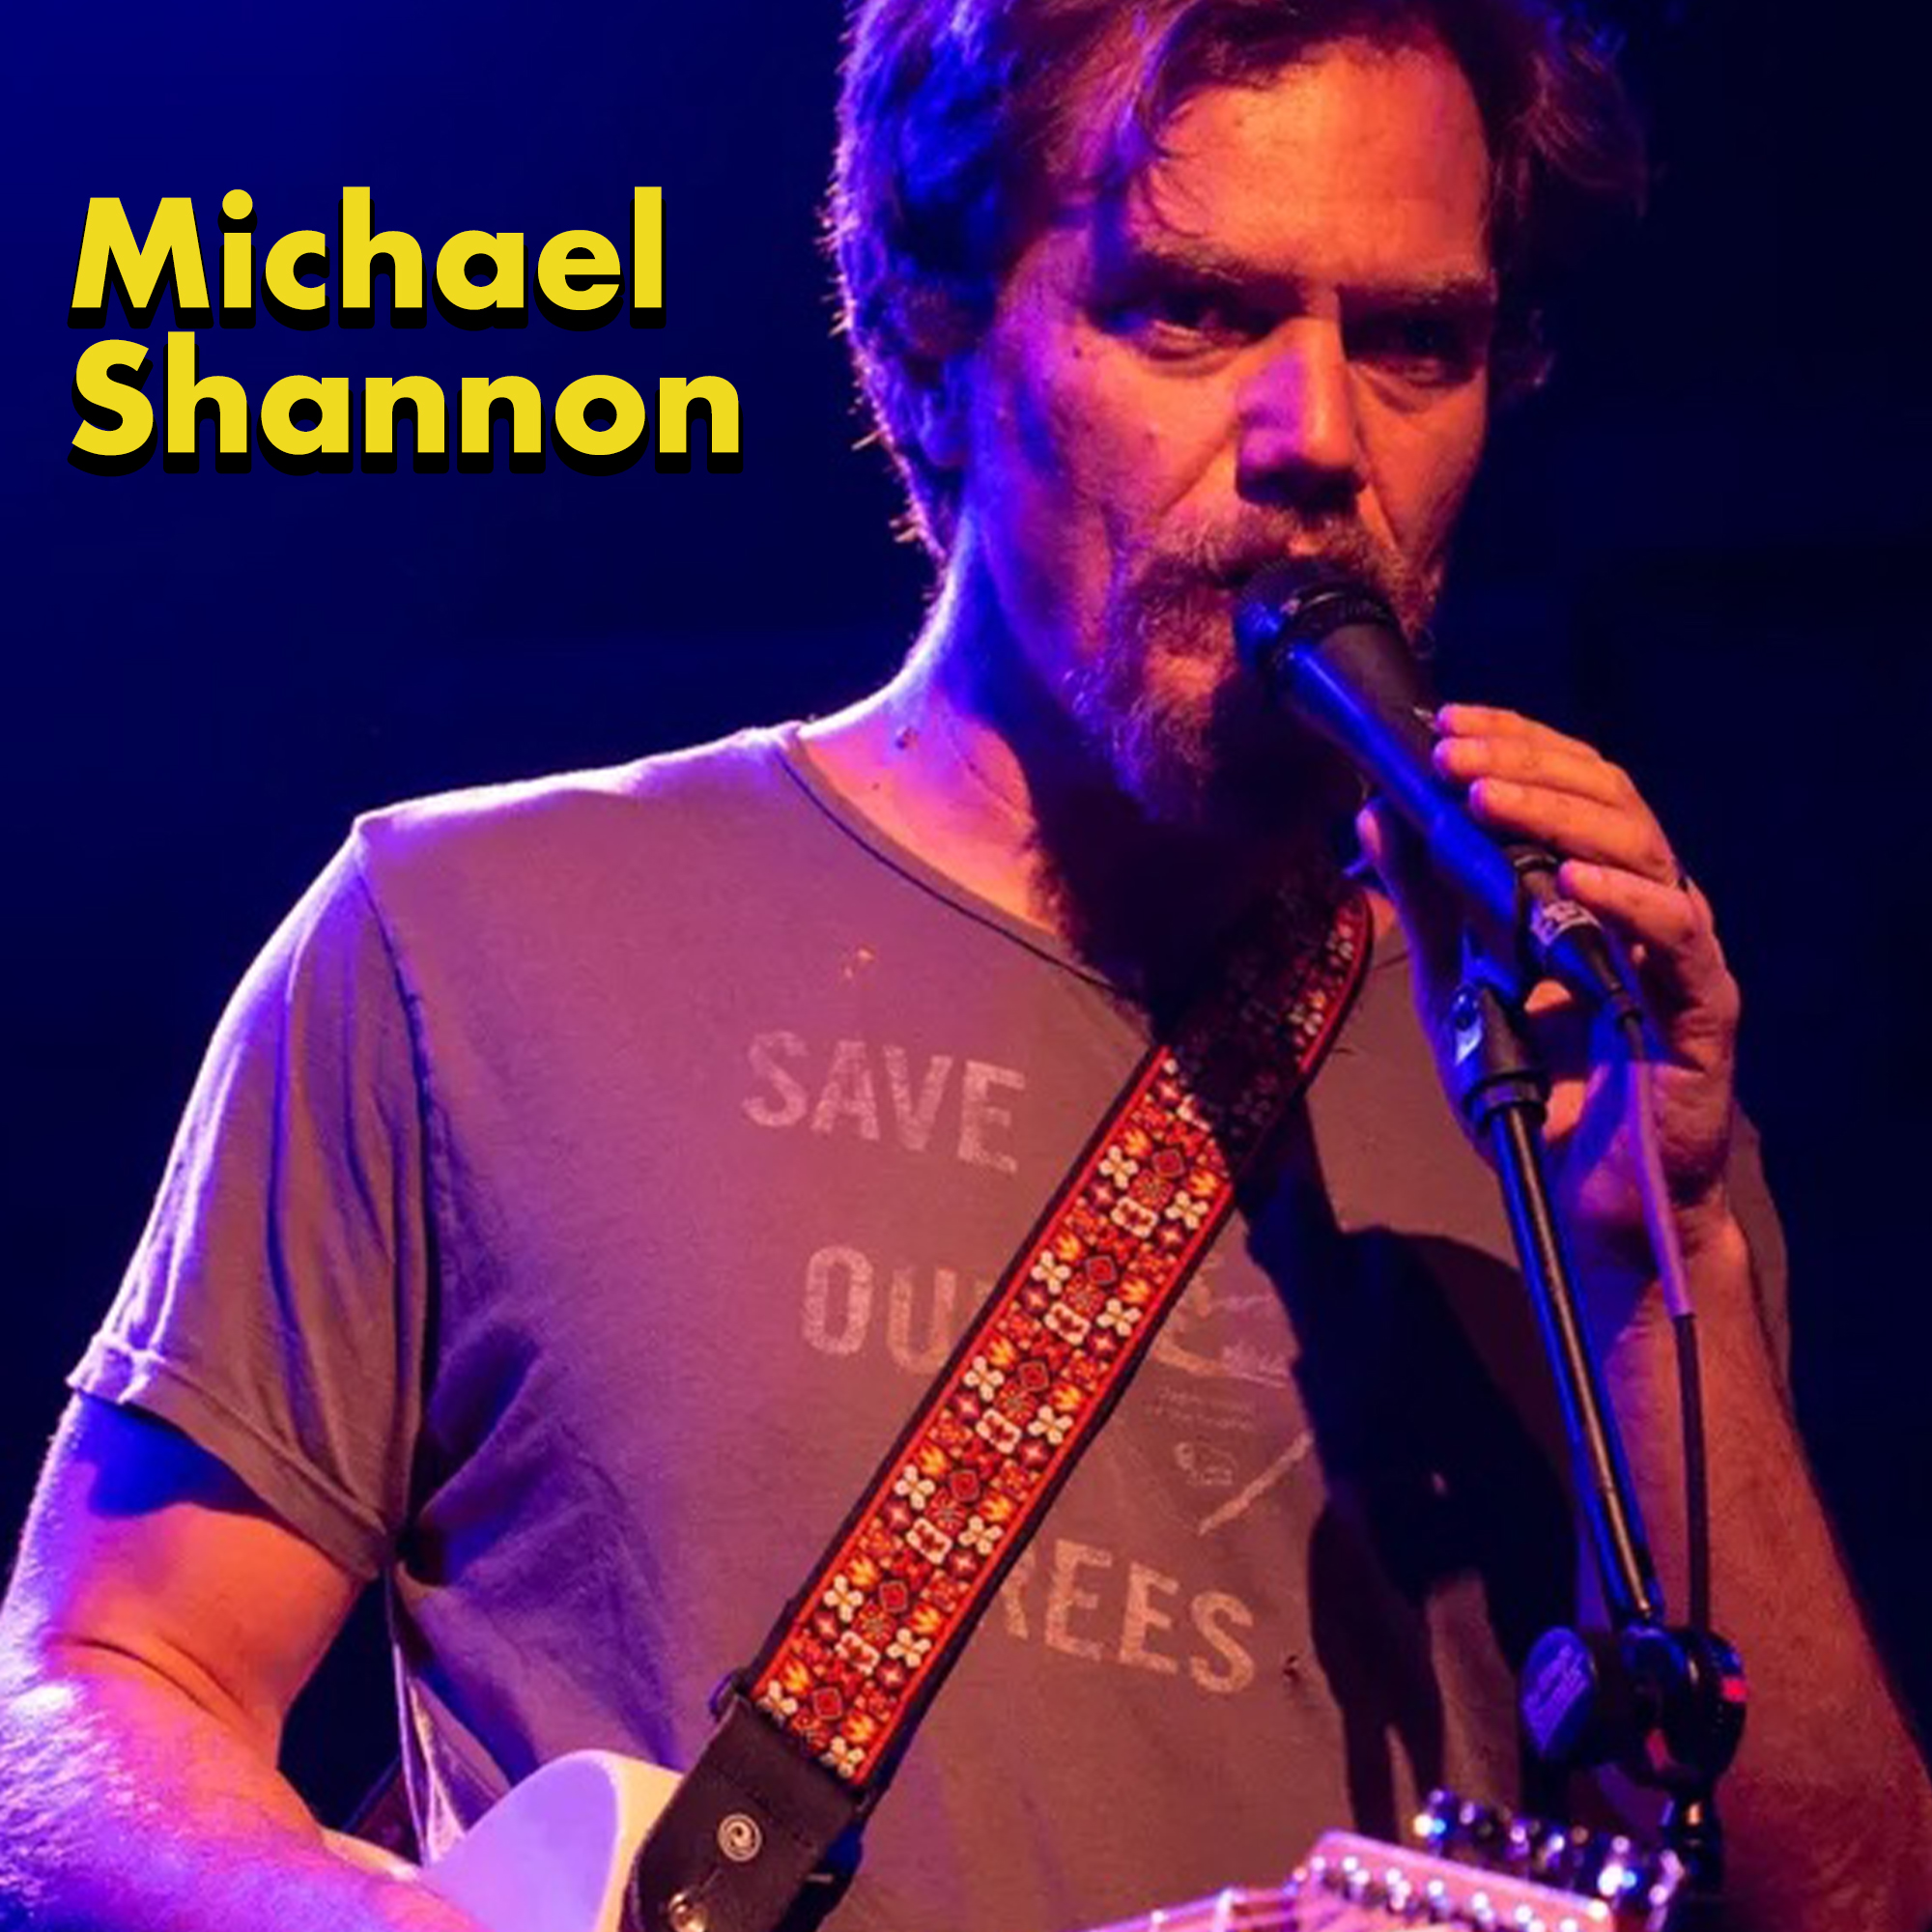 actors in bands - singing - Michael Shannon Save Ka 30 Wees